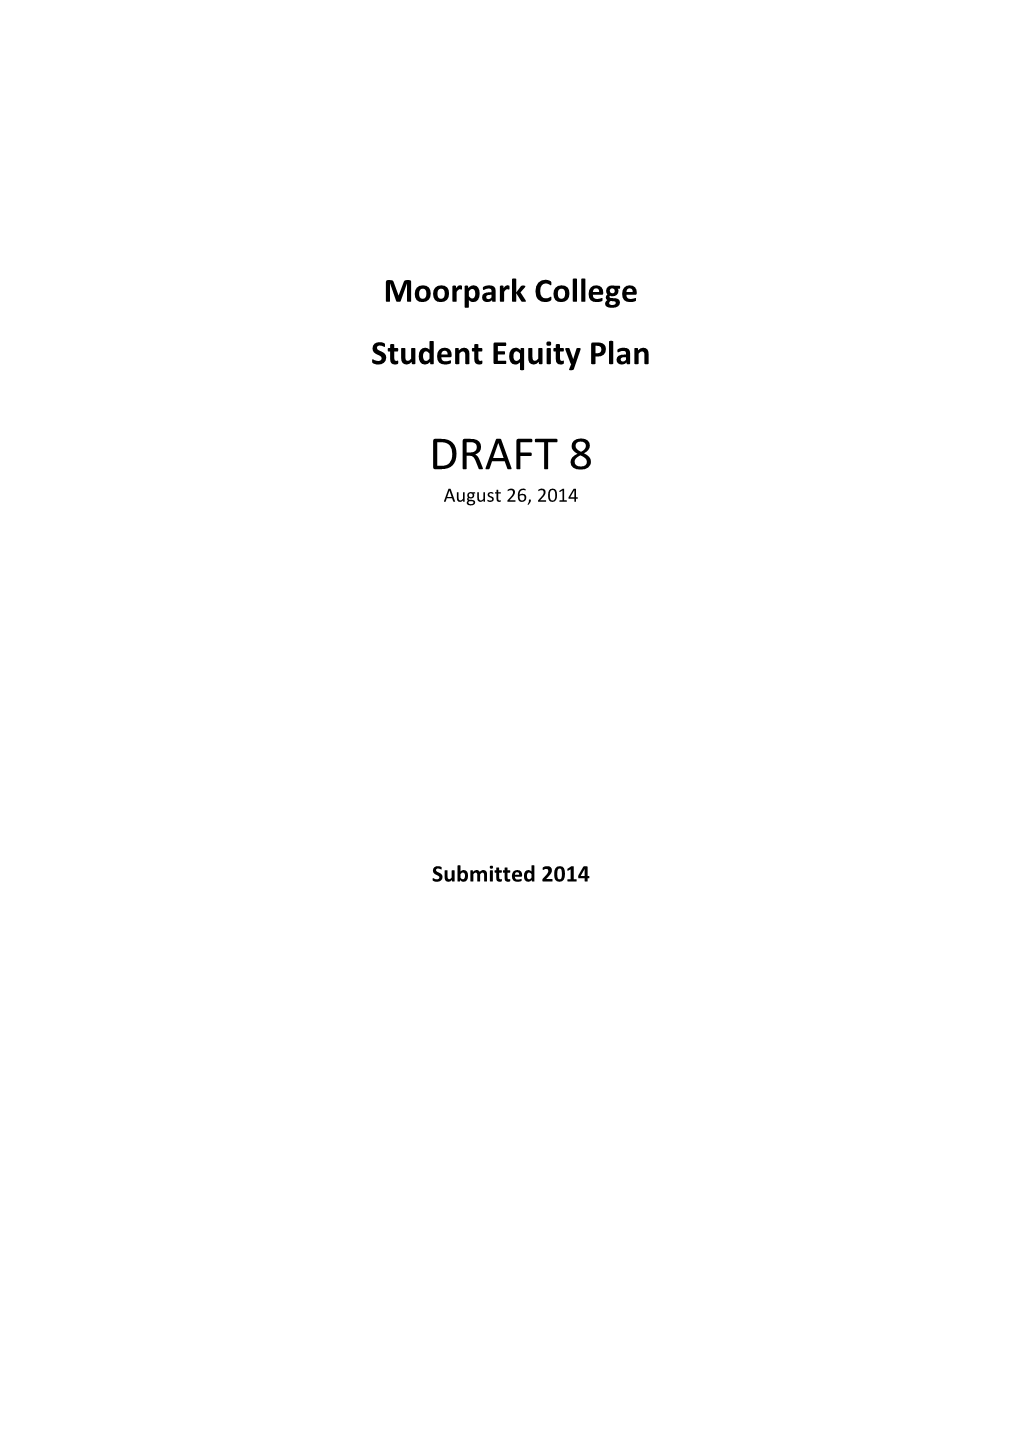 Moorpark College Student Equity Plan